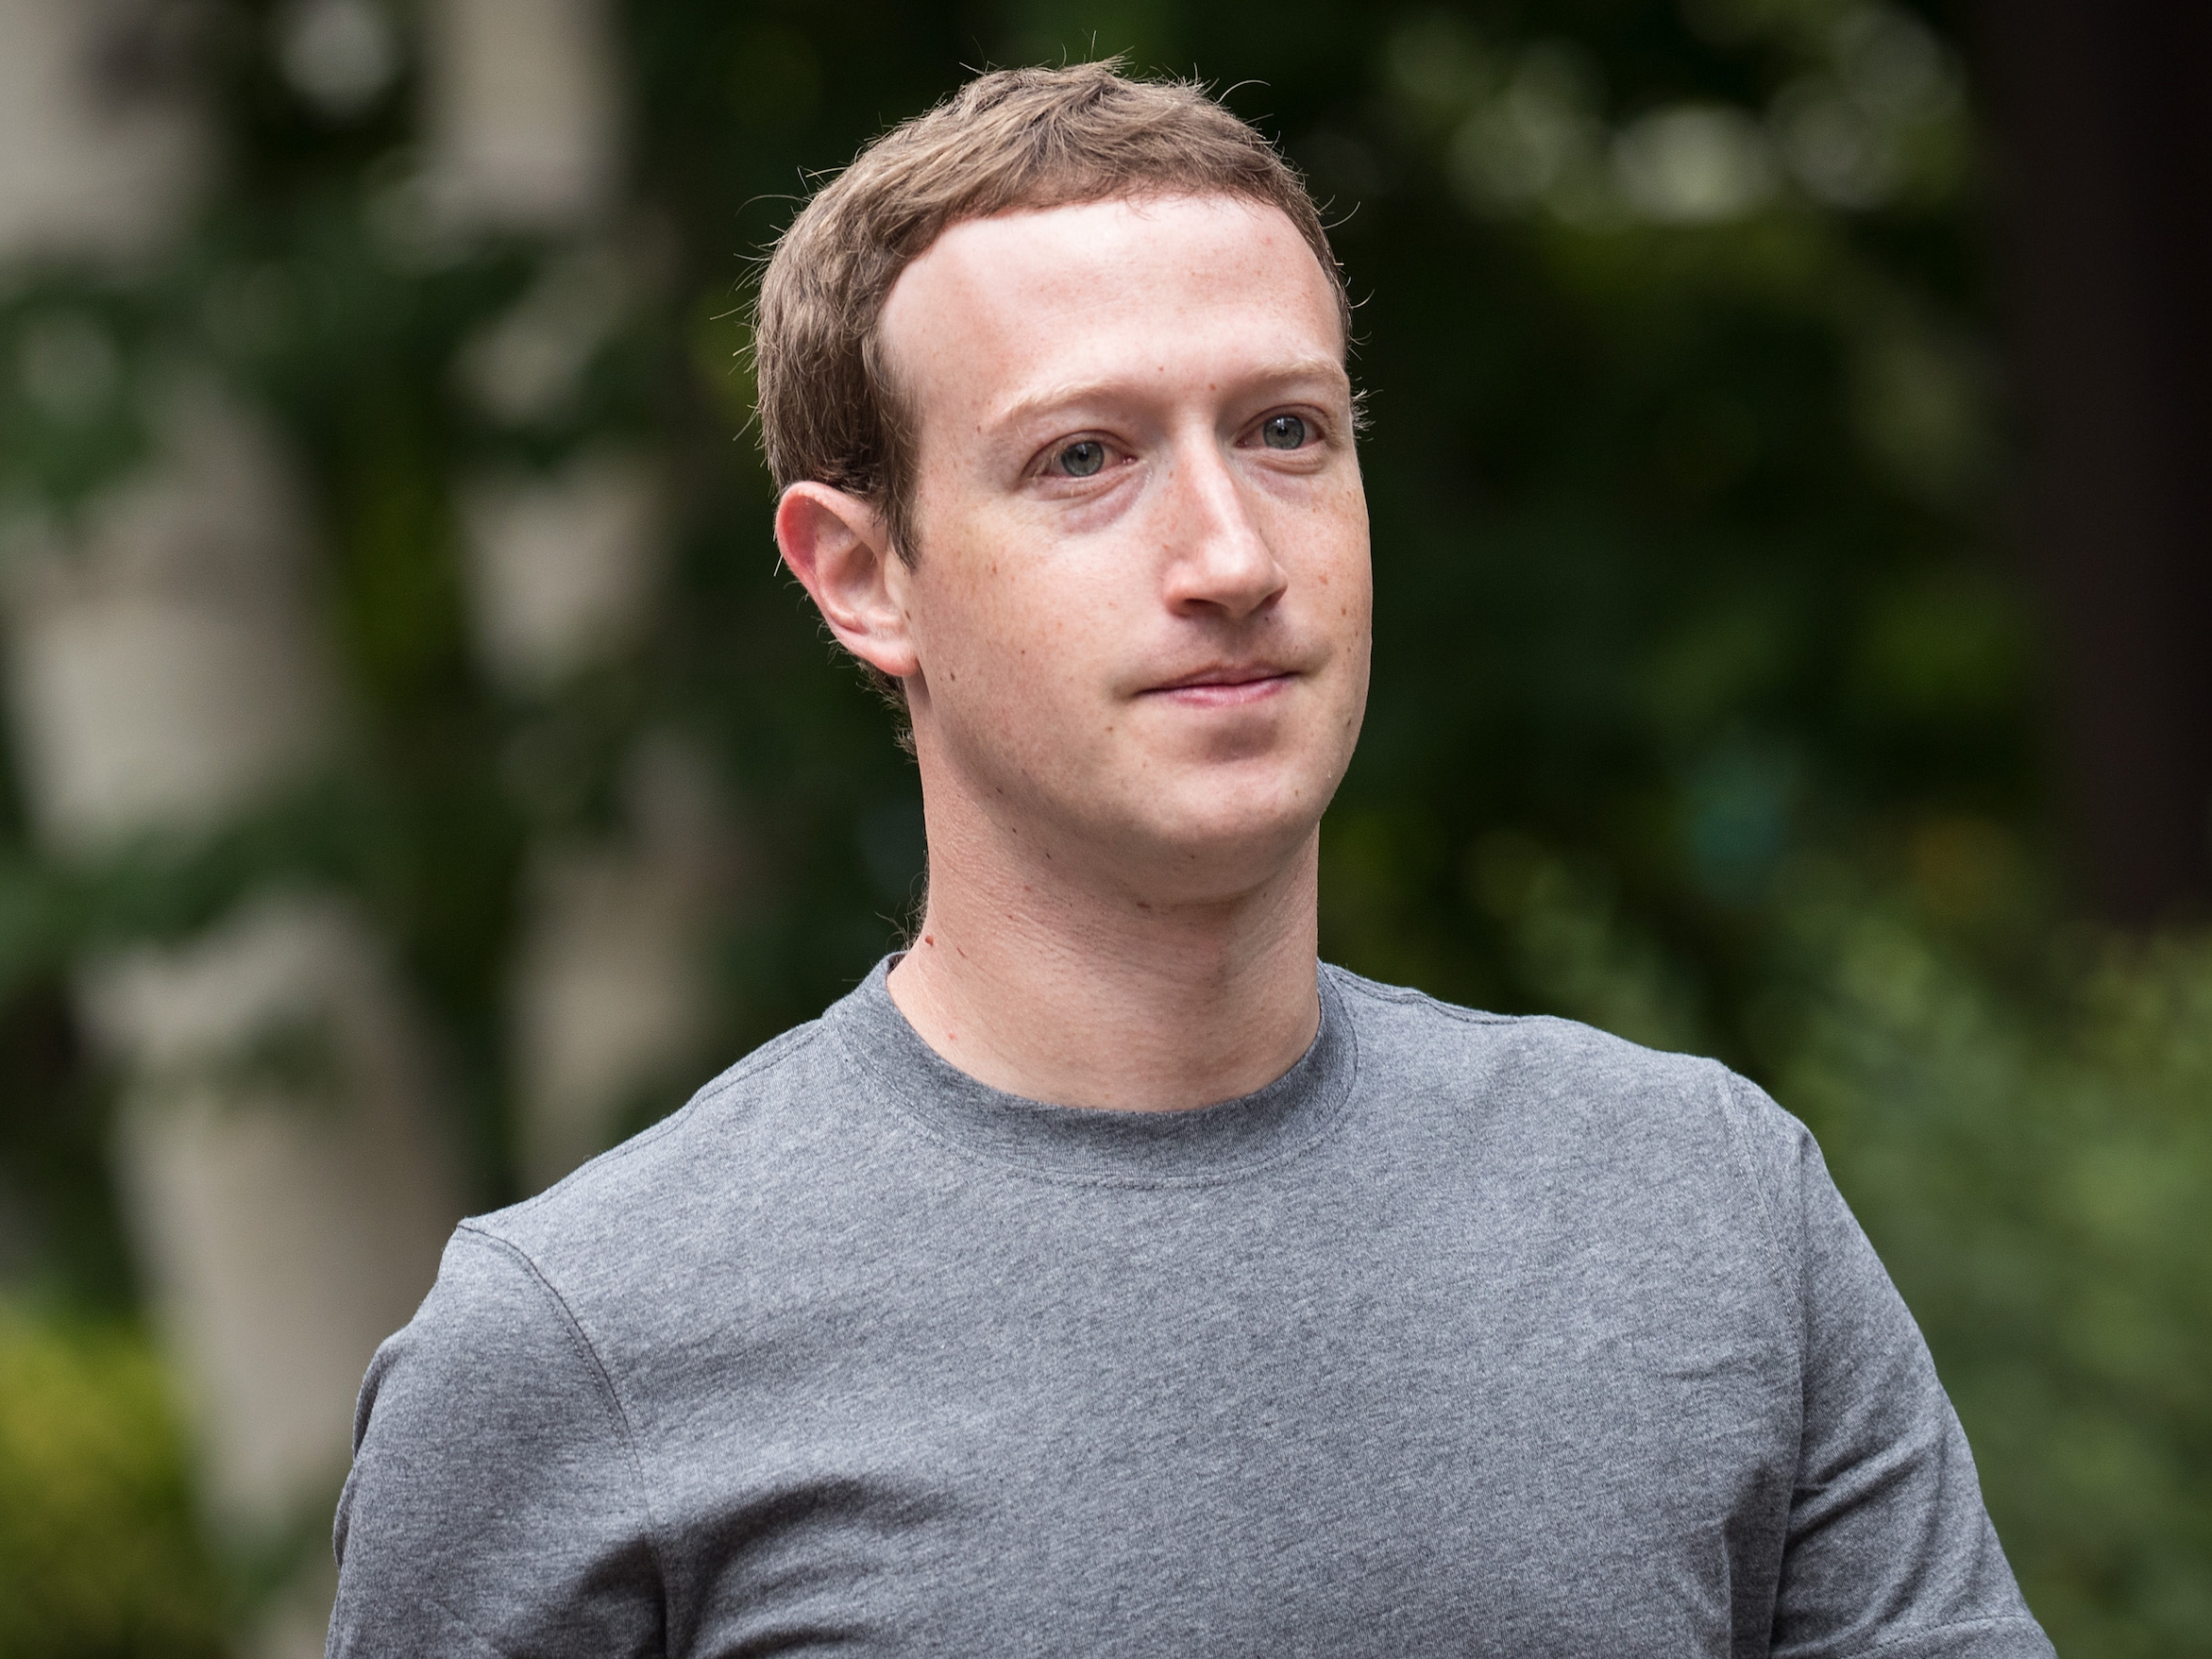 States United Executive Chief Mark Zuckerberg Election, PNG Image